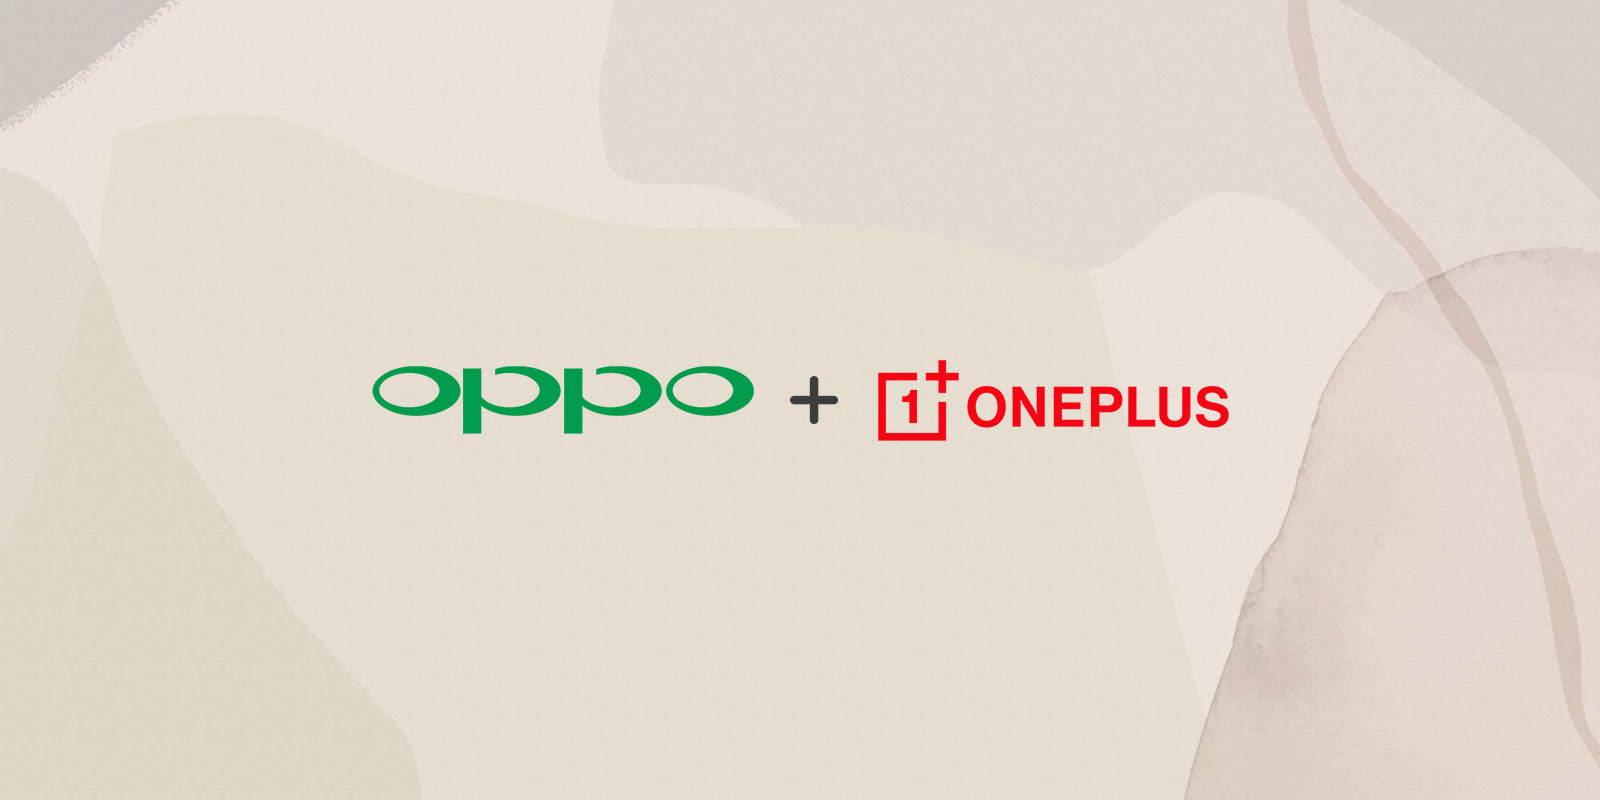 Oneplus Announces Merger With Oppo, Will Continue To Operate As An “Independent Brand”